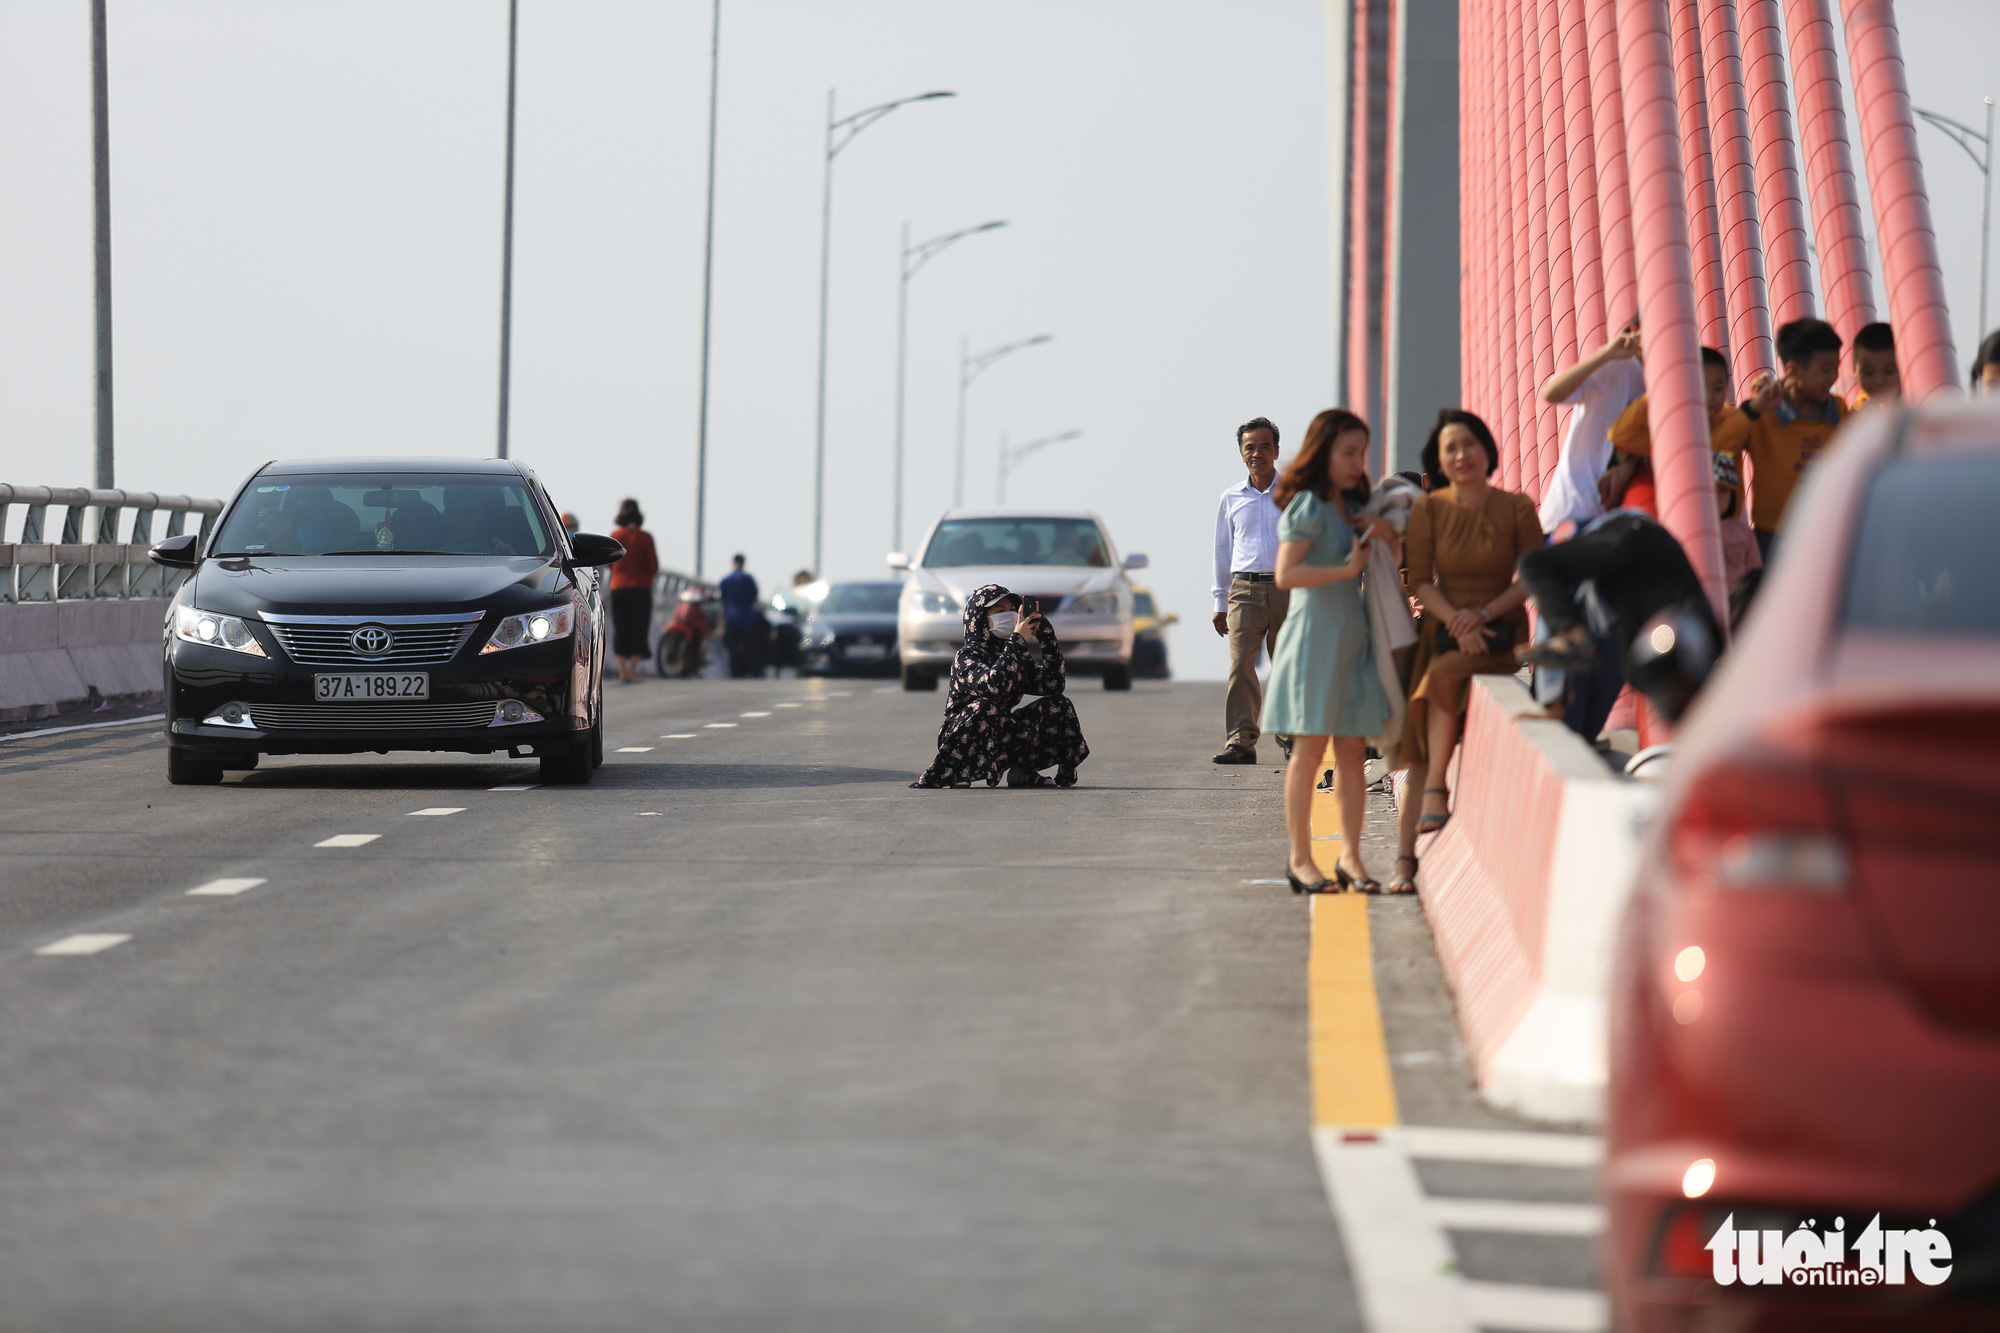 People dangerously stand and sit amidst the road on the Cua Hoi Bridge to take photos in north-central Vietnam, February 15, 2021. Photo: Ngoc Thang / Tuoi Tre